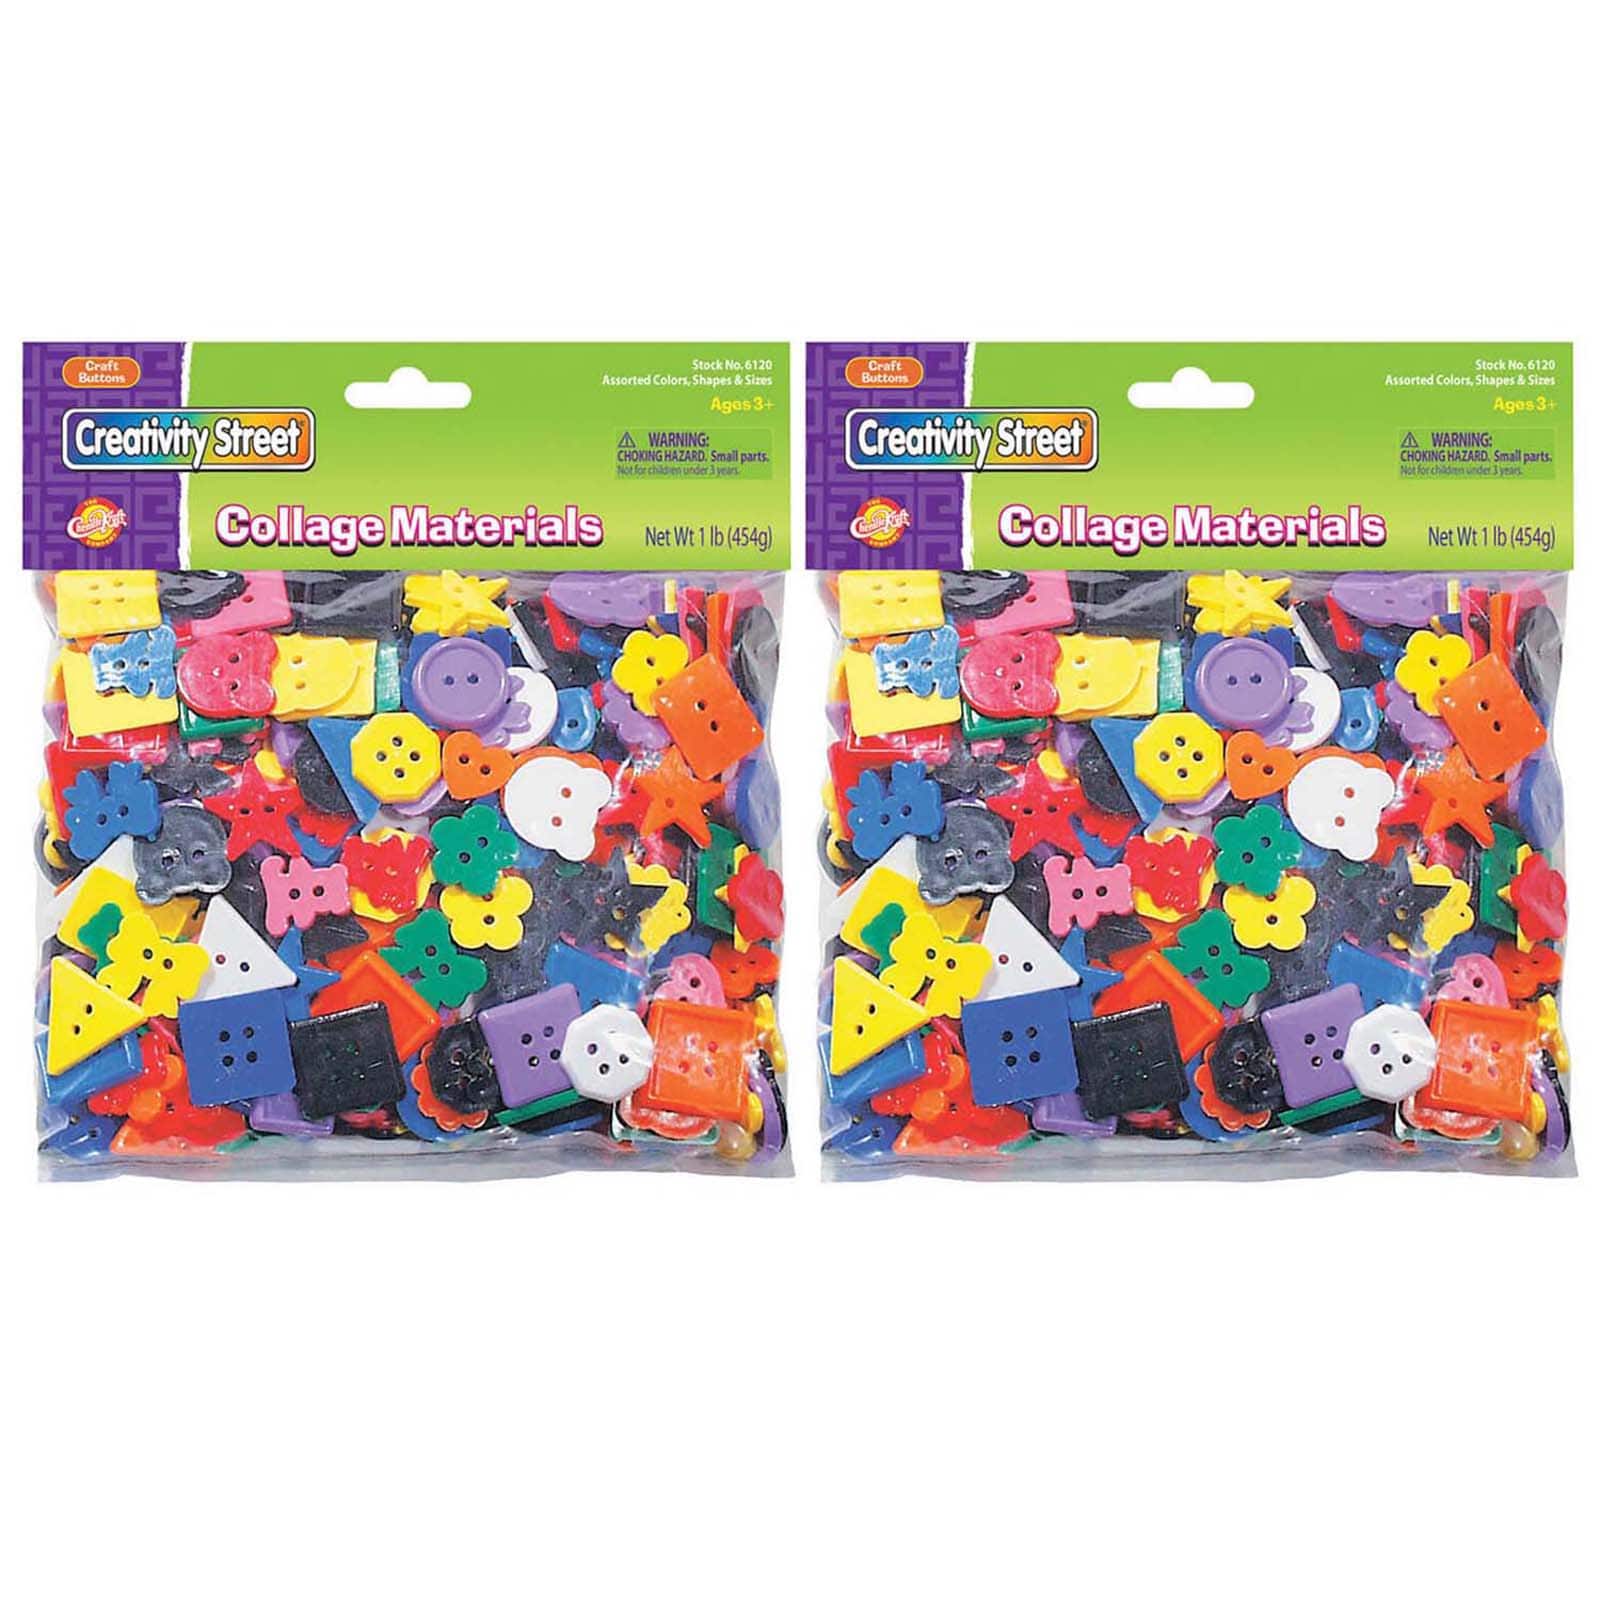 Pack of 100g - Mixed Sizes of Various Shaped Mixed Buttons for